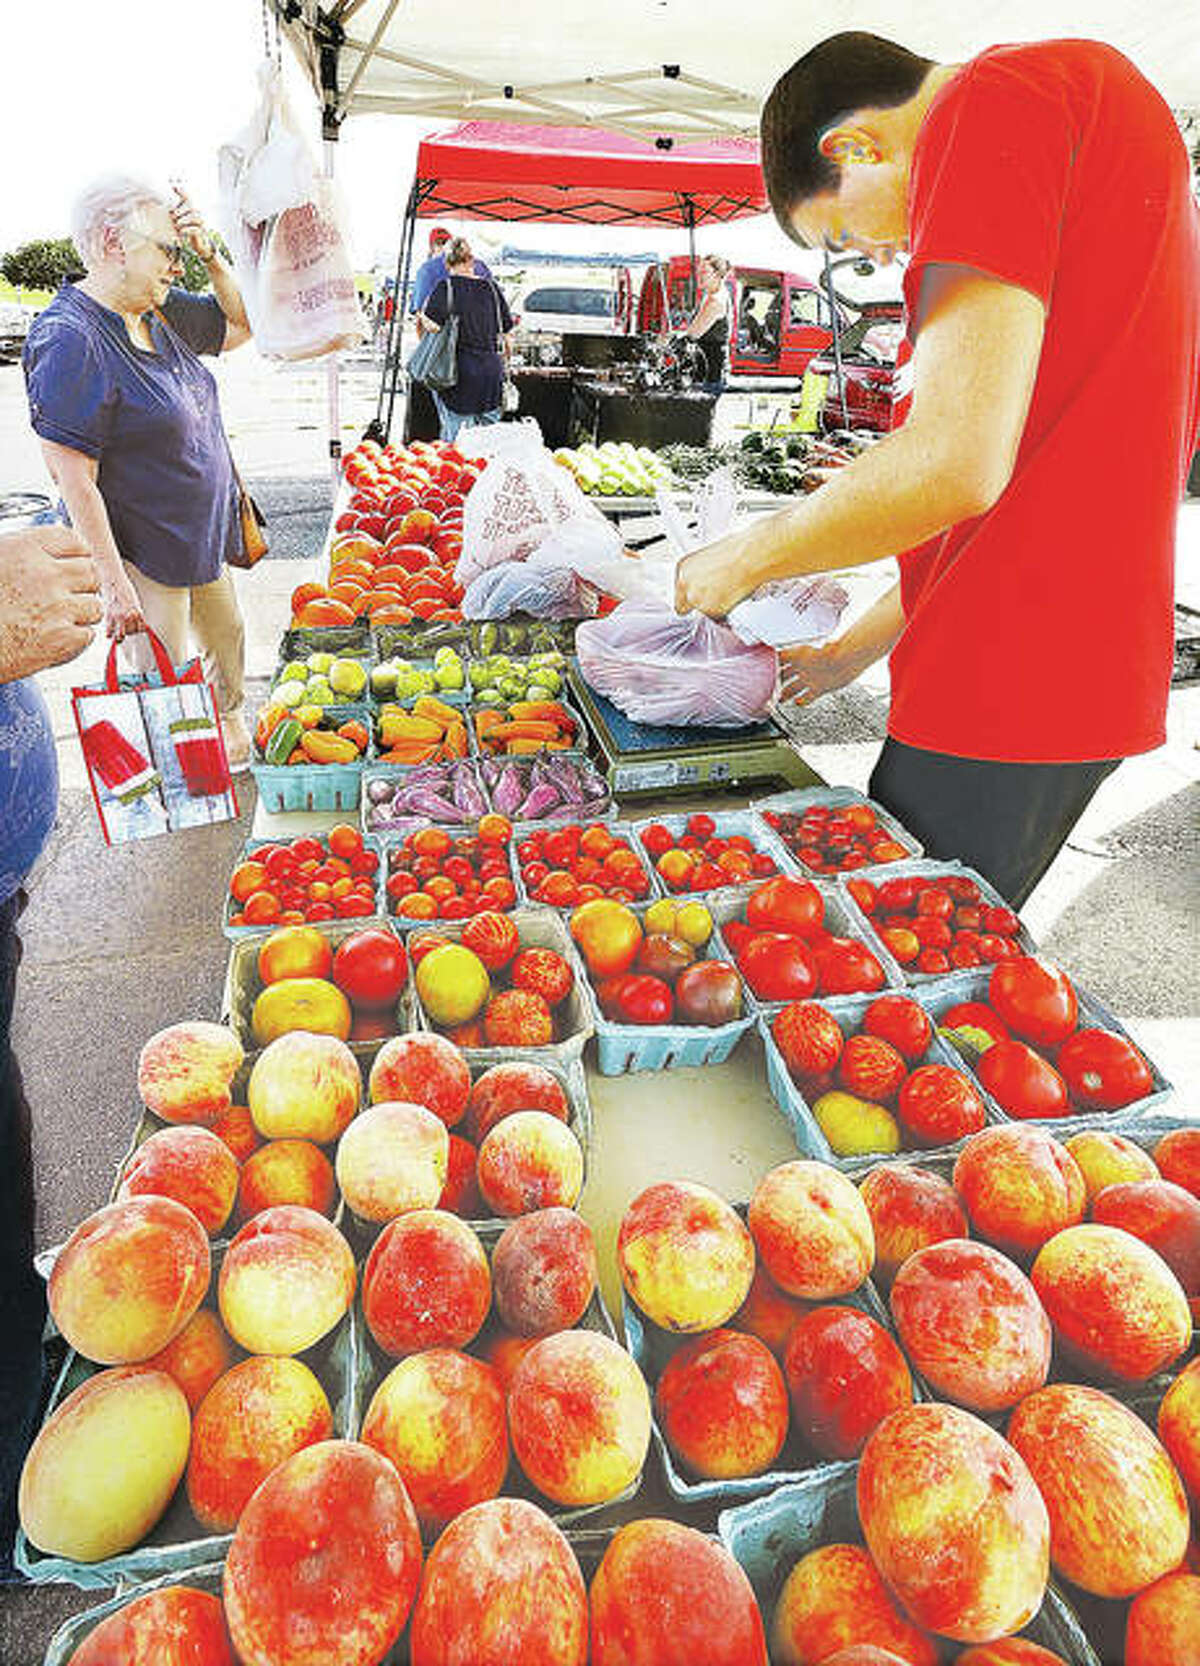 Jo Ellen Johnson, left, of Grafton, looks over the wares at the Baalman’s Produce stand at the Alton farmer’s market as Drew Baalman, right, weighs up a customer’s fresh fruit and veggies.